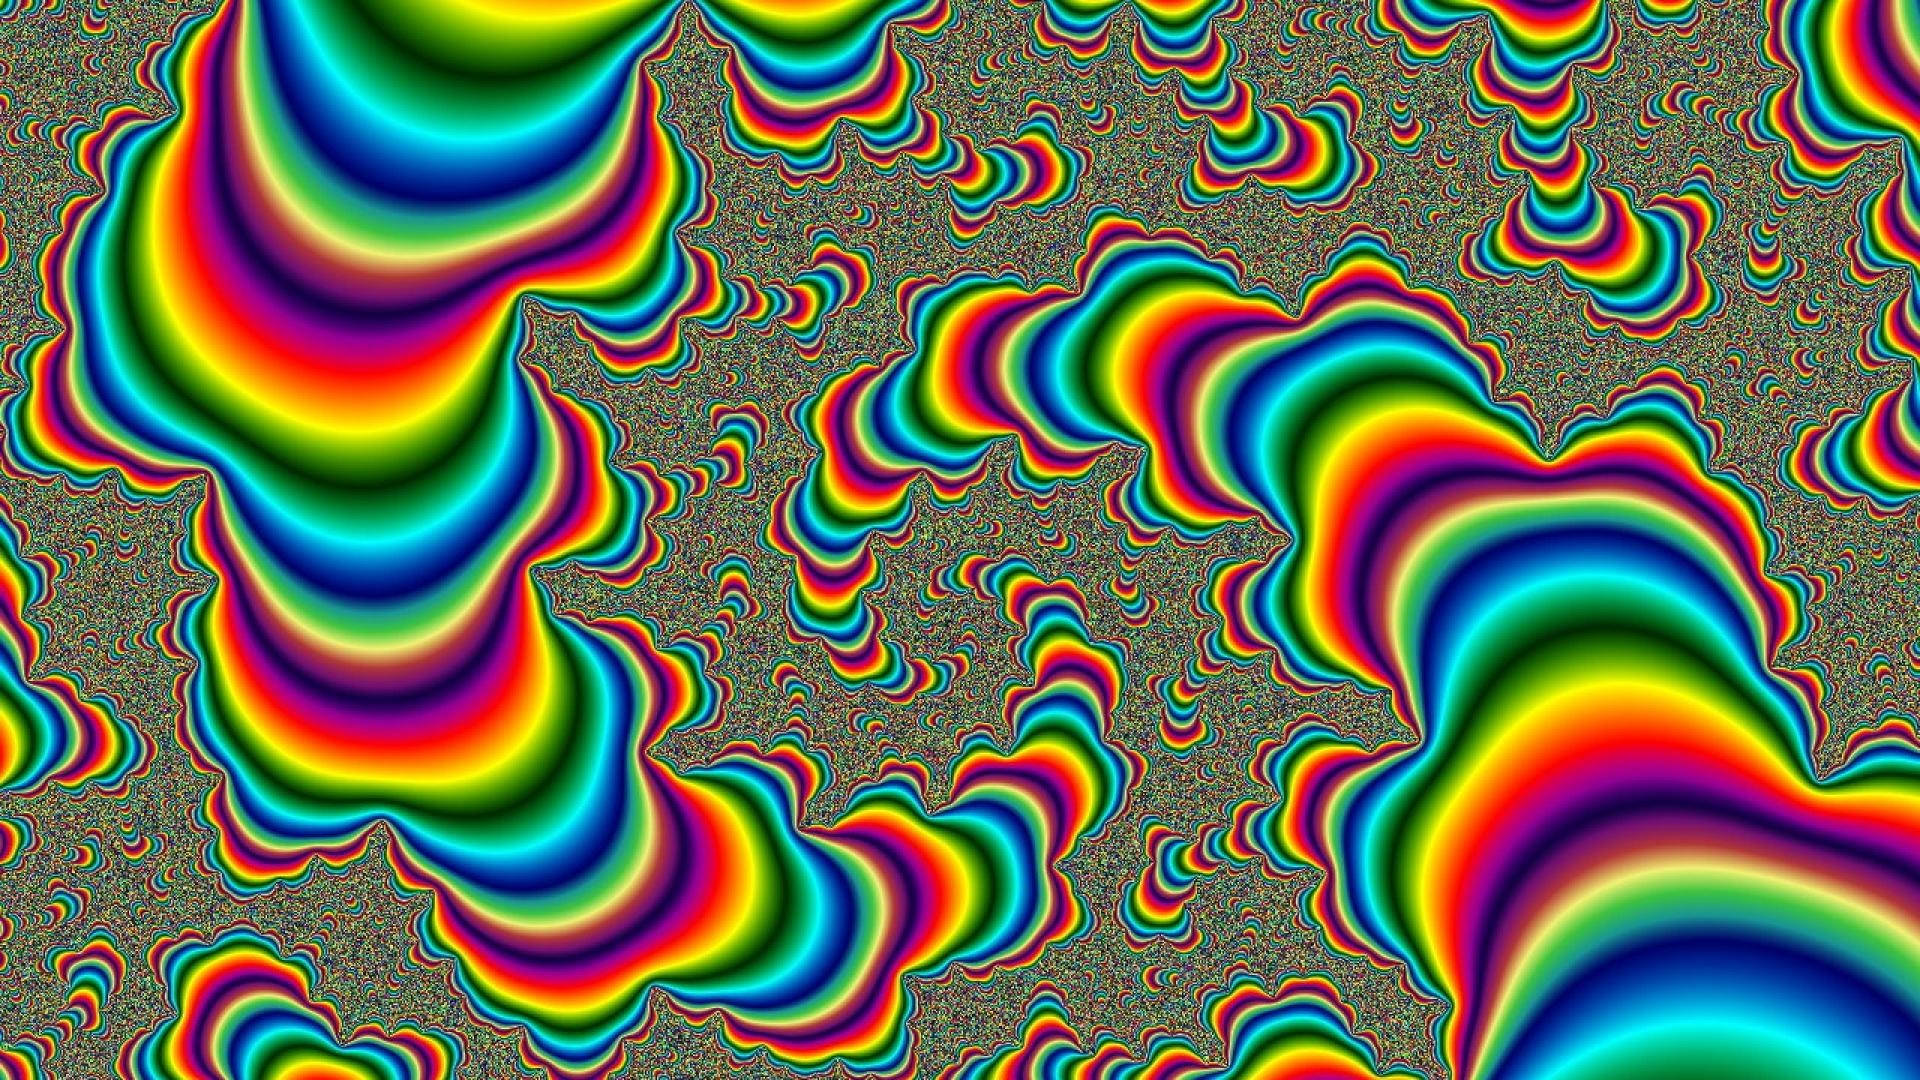 Hd Psychedelic Worms Background